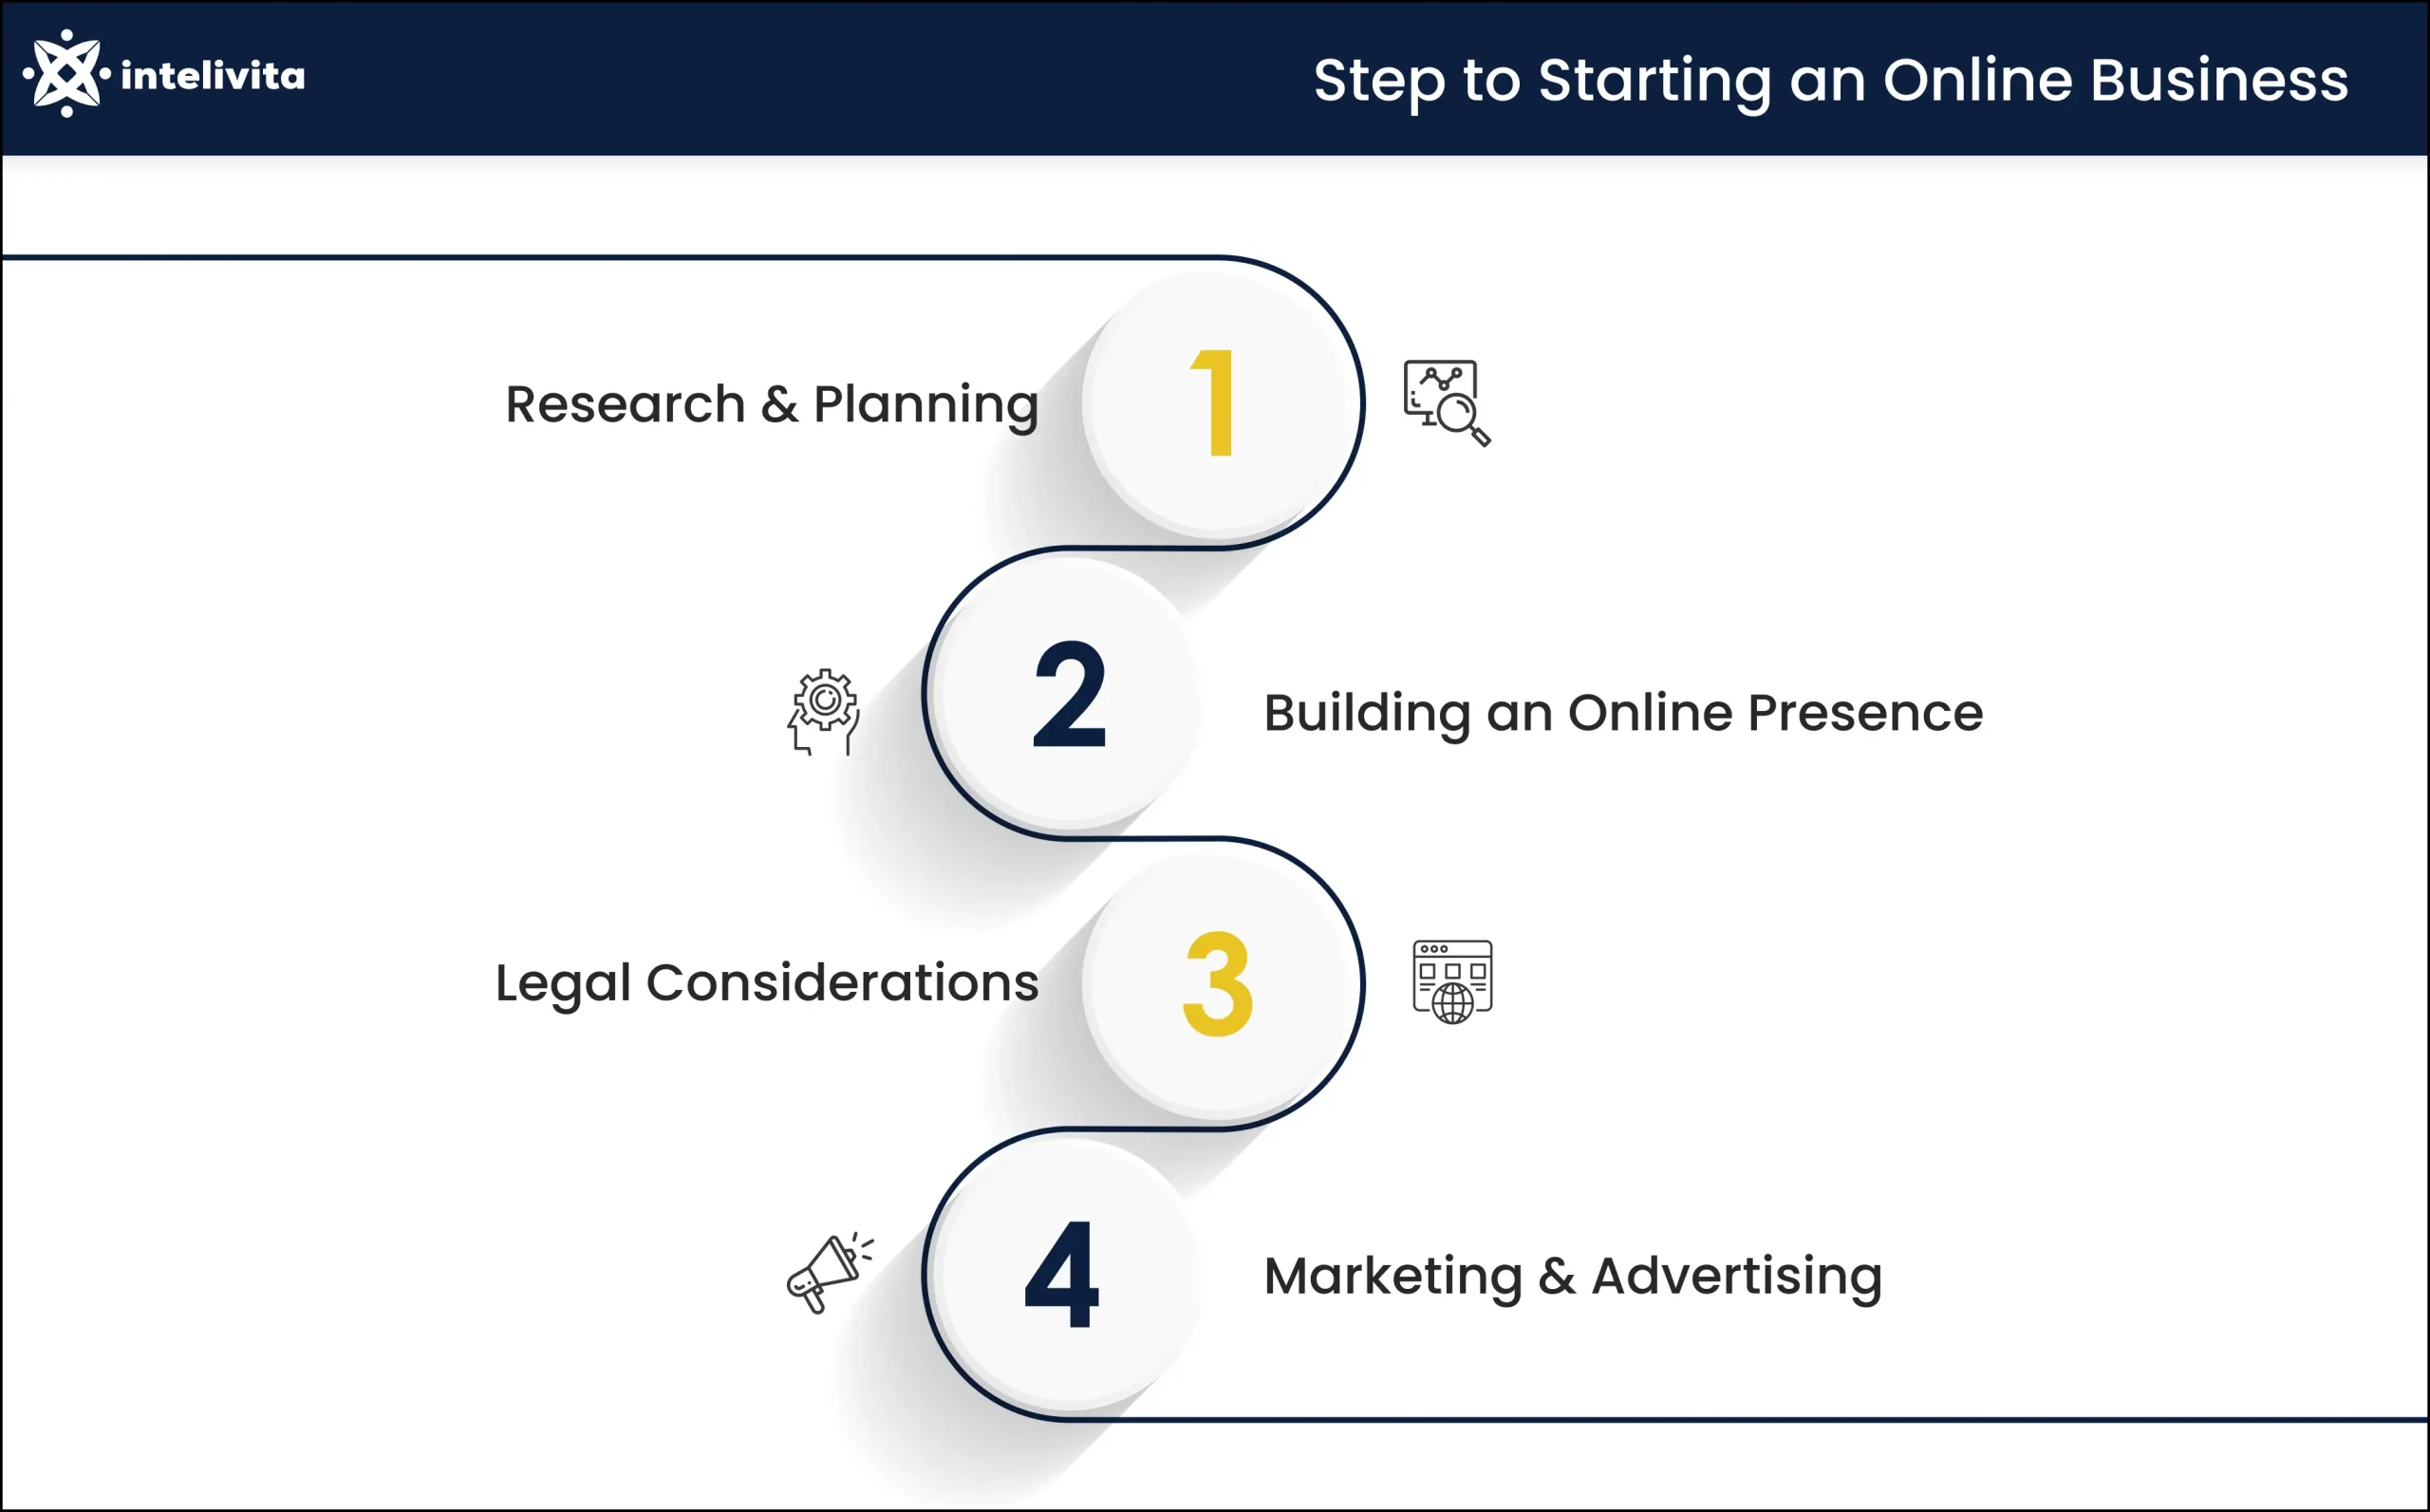 Image displaying the Steps to Starting an Online Business